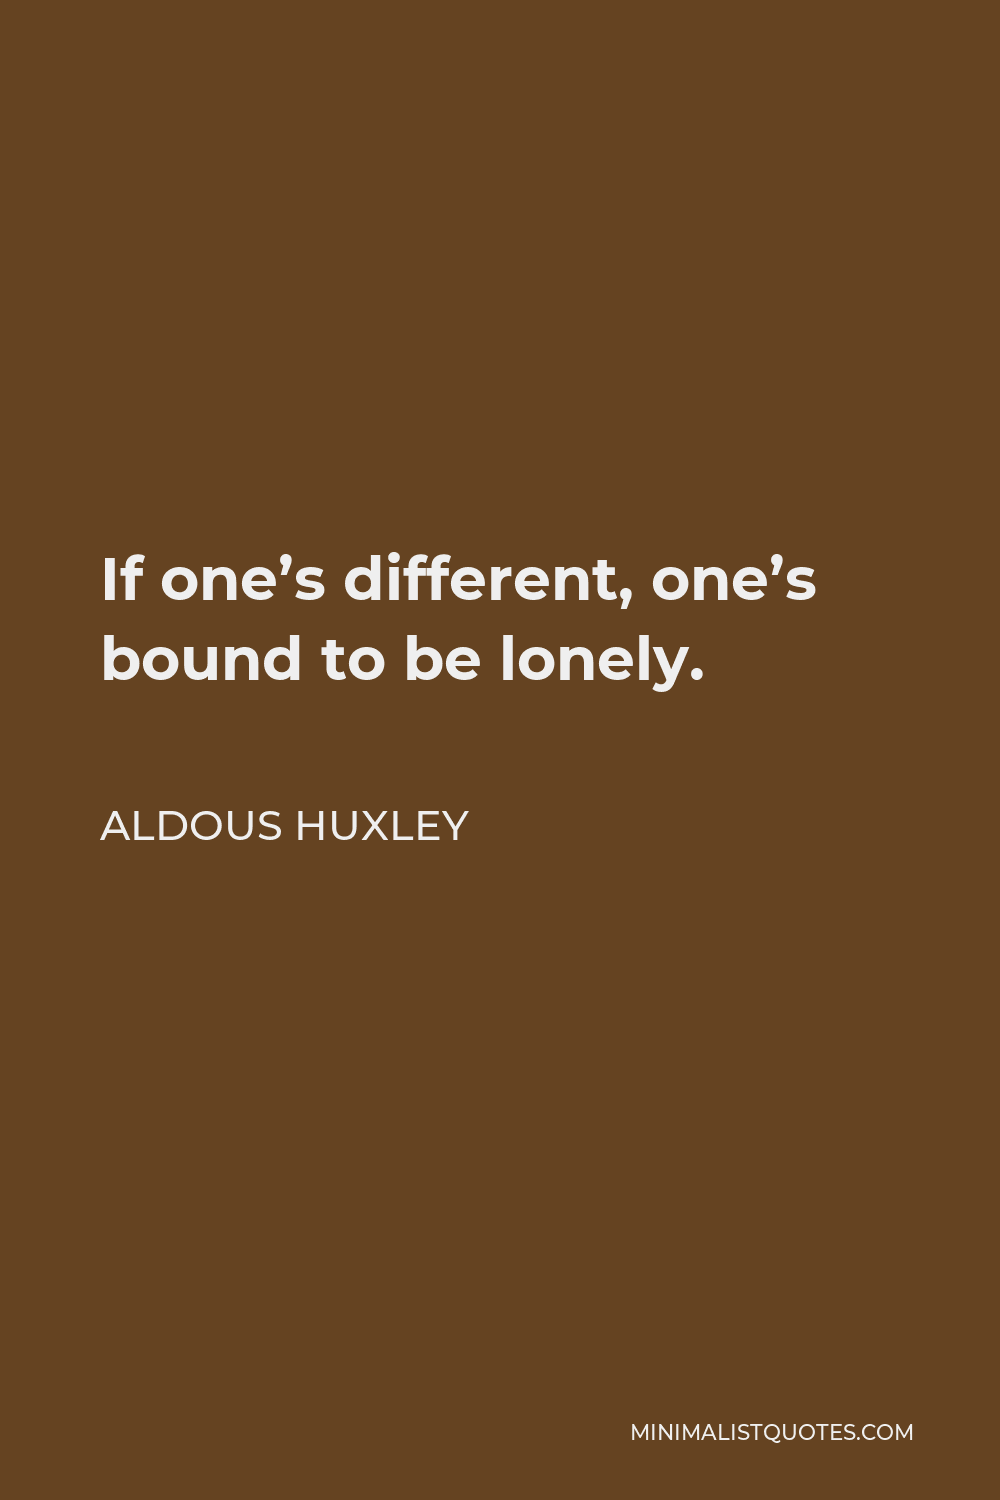 Aldous Huxley Quote - If one’s different, one’s bound to be lonely.